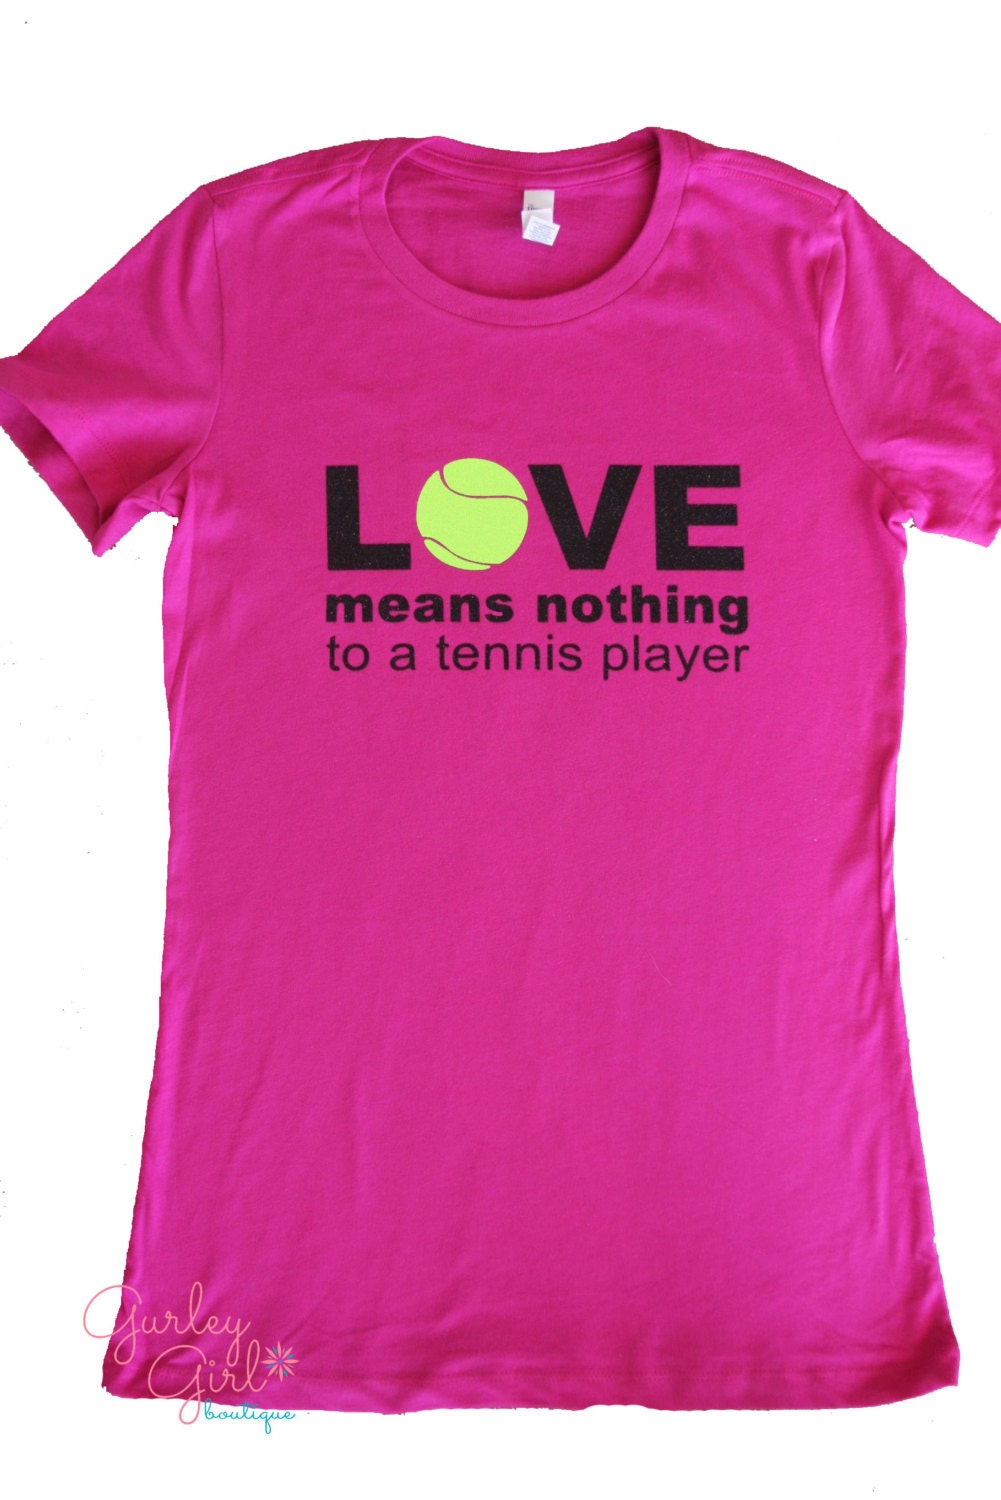 Women's Tennis Shirt- Love means nothing to a tennis player